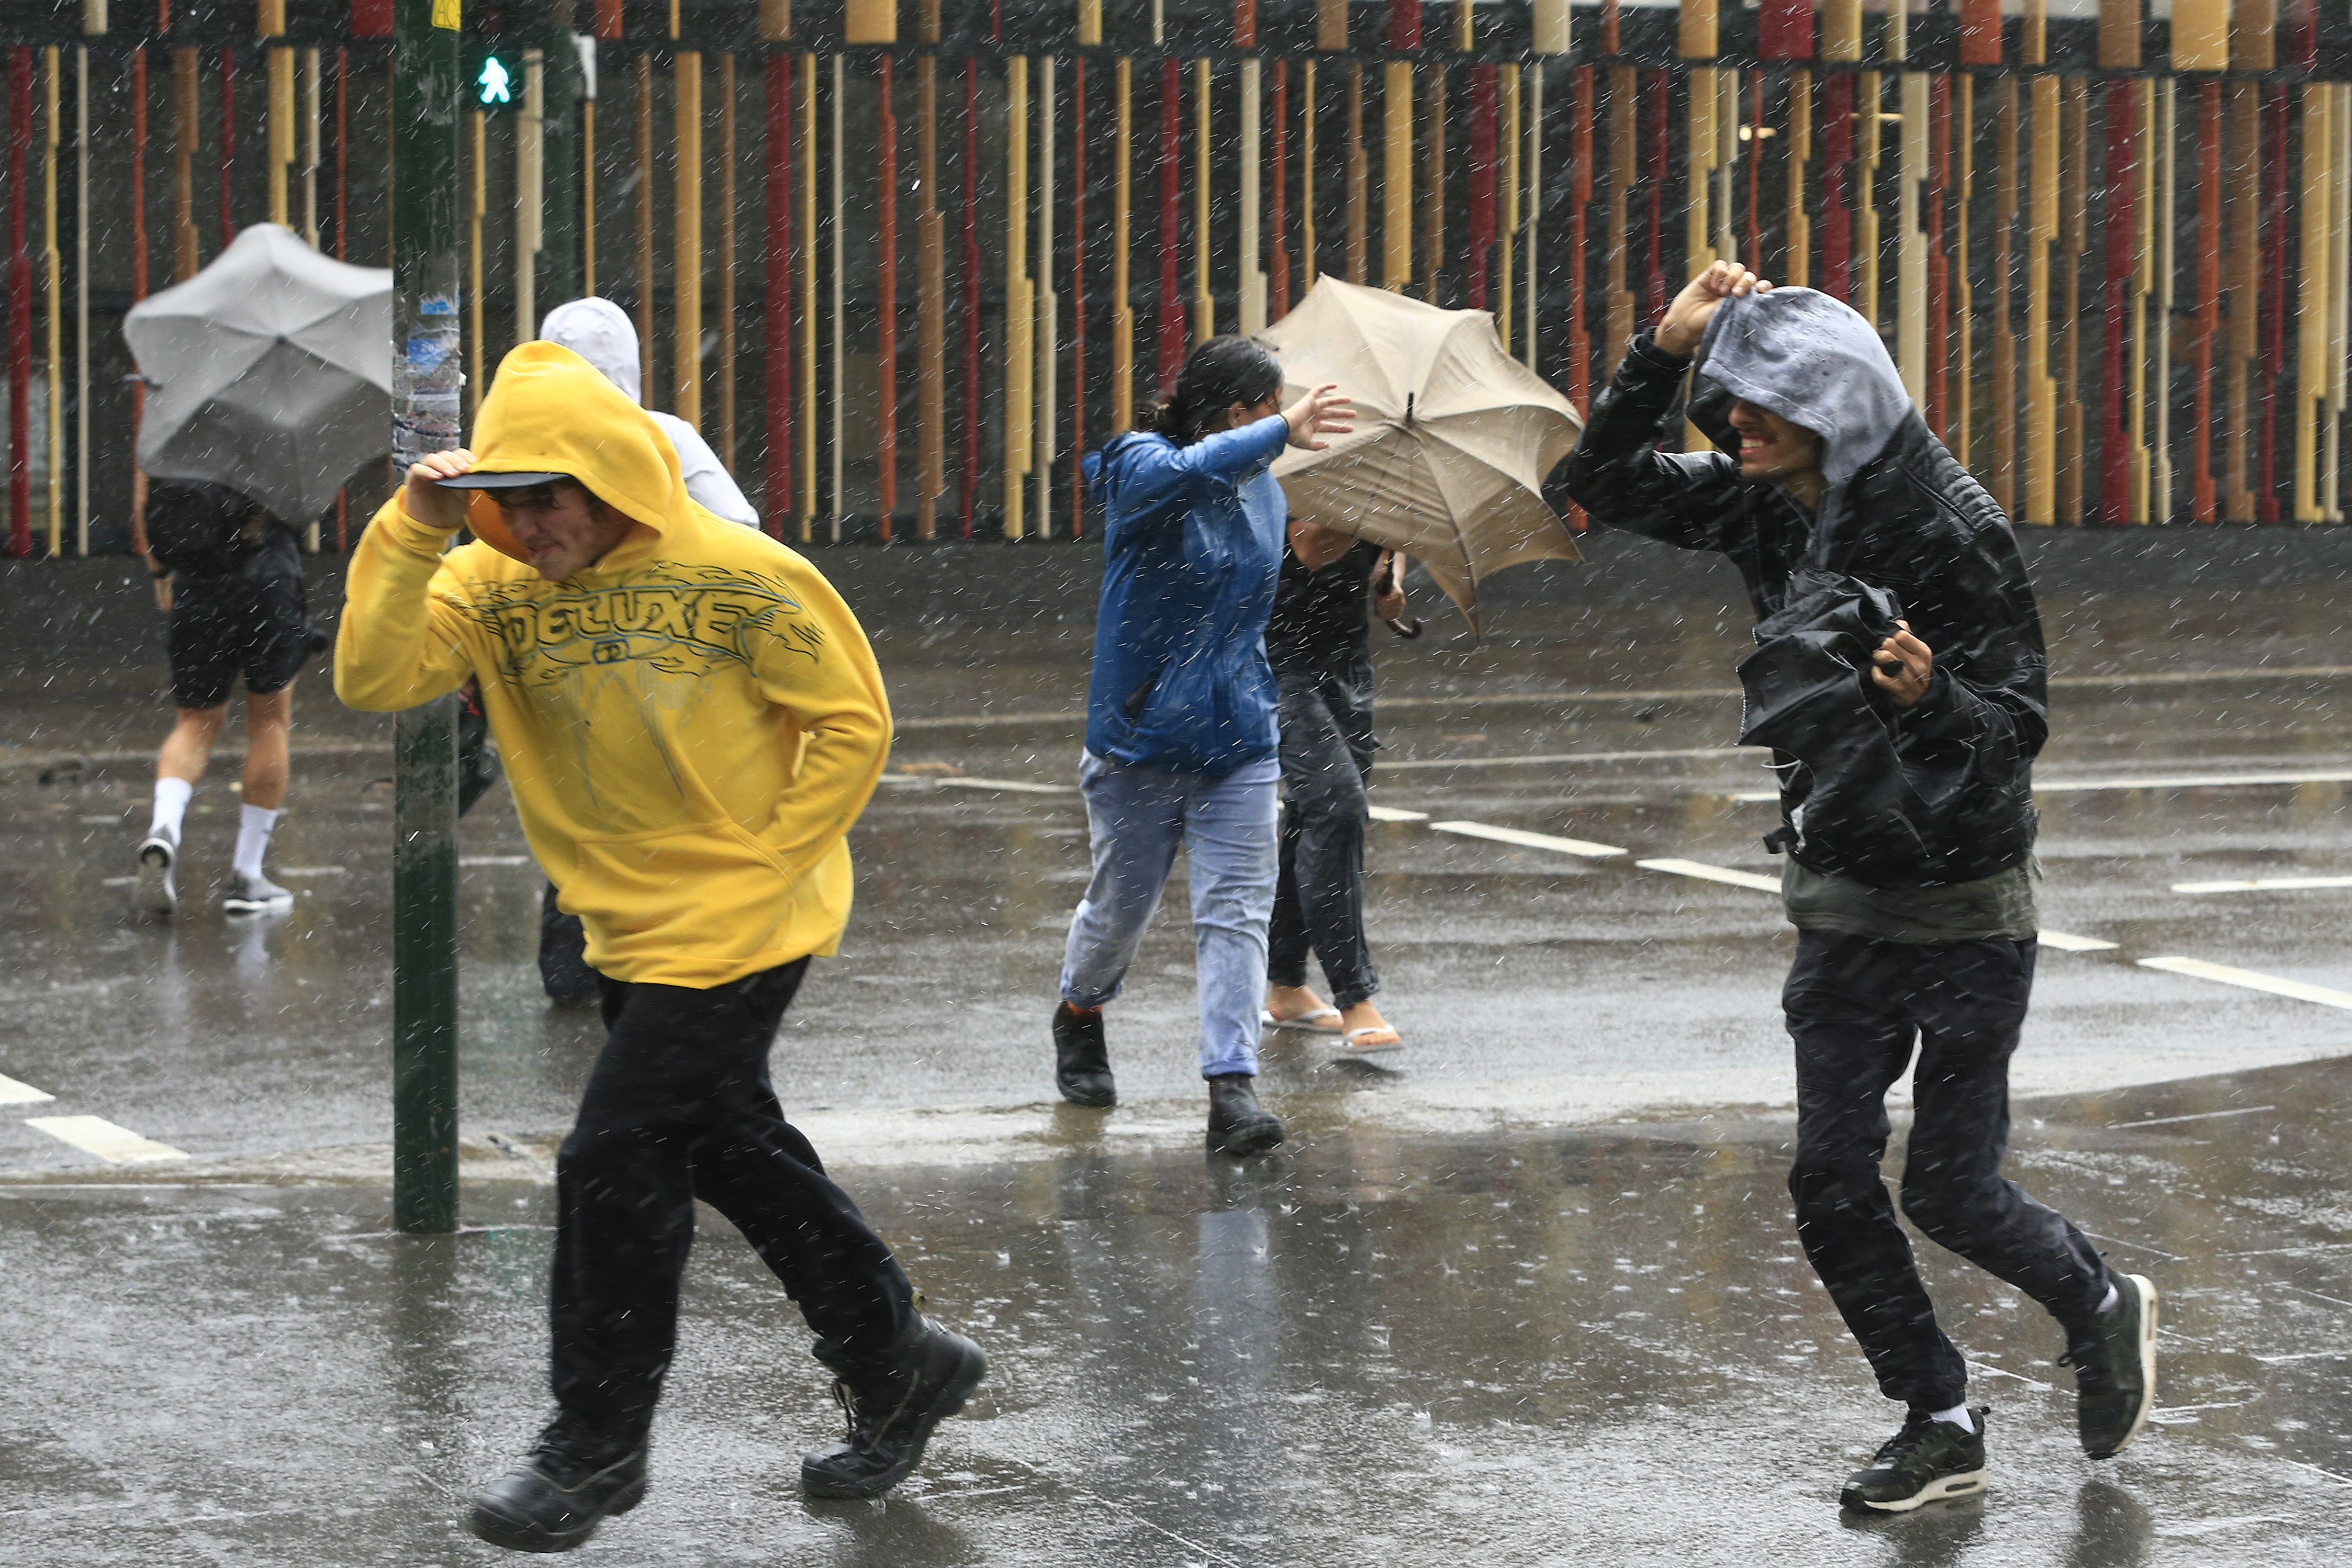 People struggle with the wind and rain on February 09, 2020 in Sydney